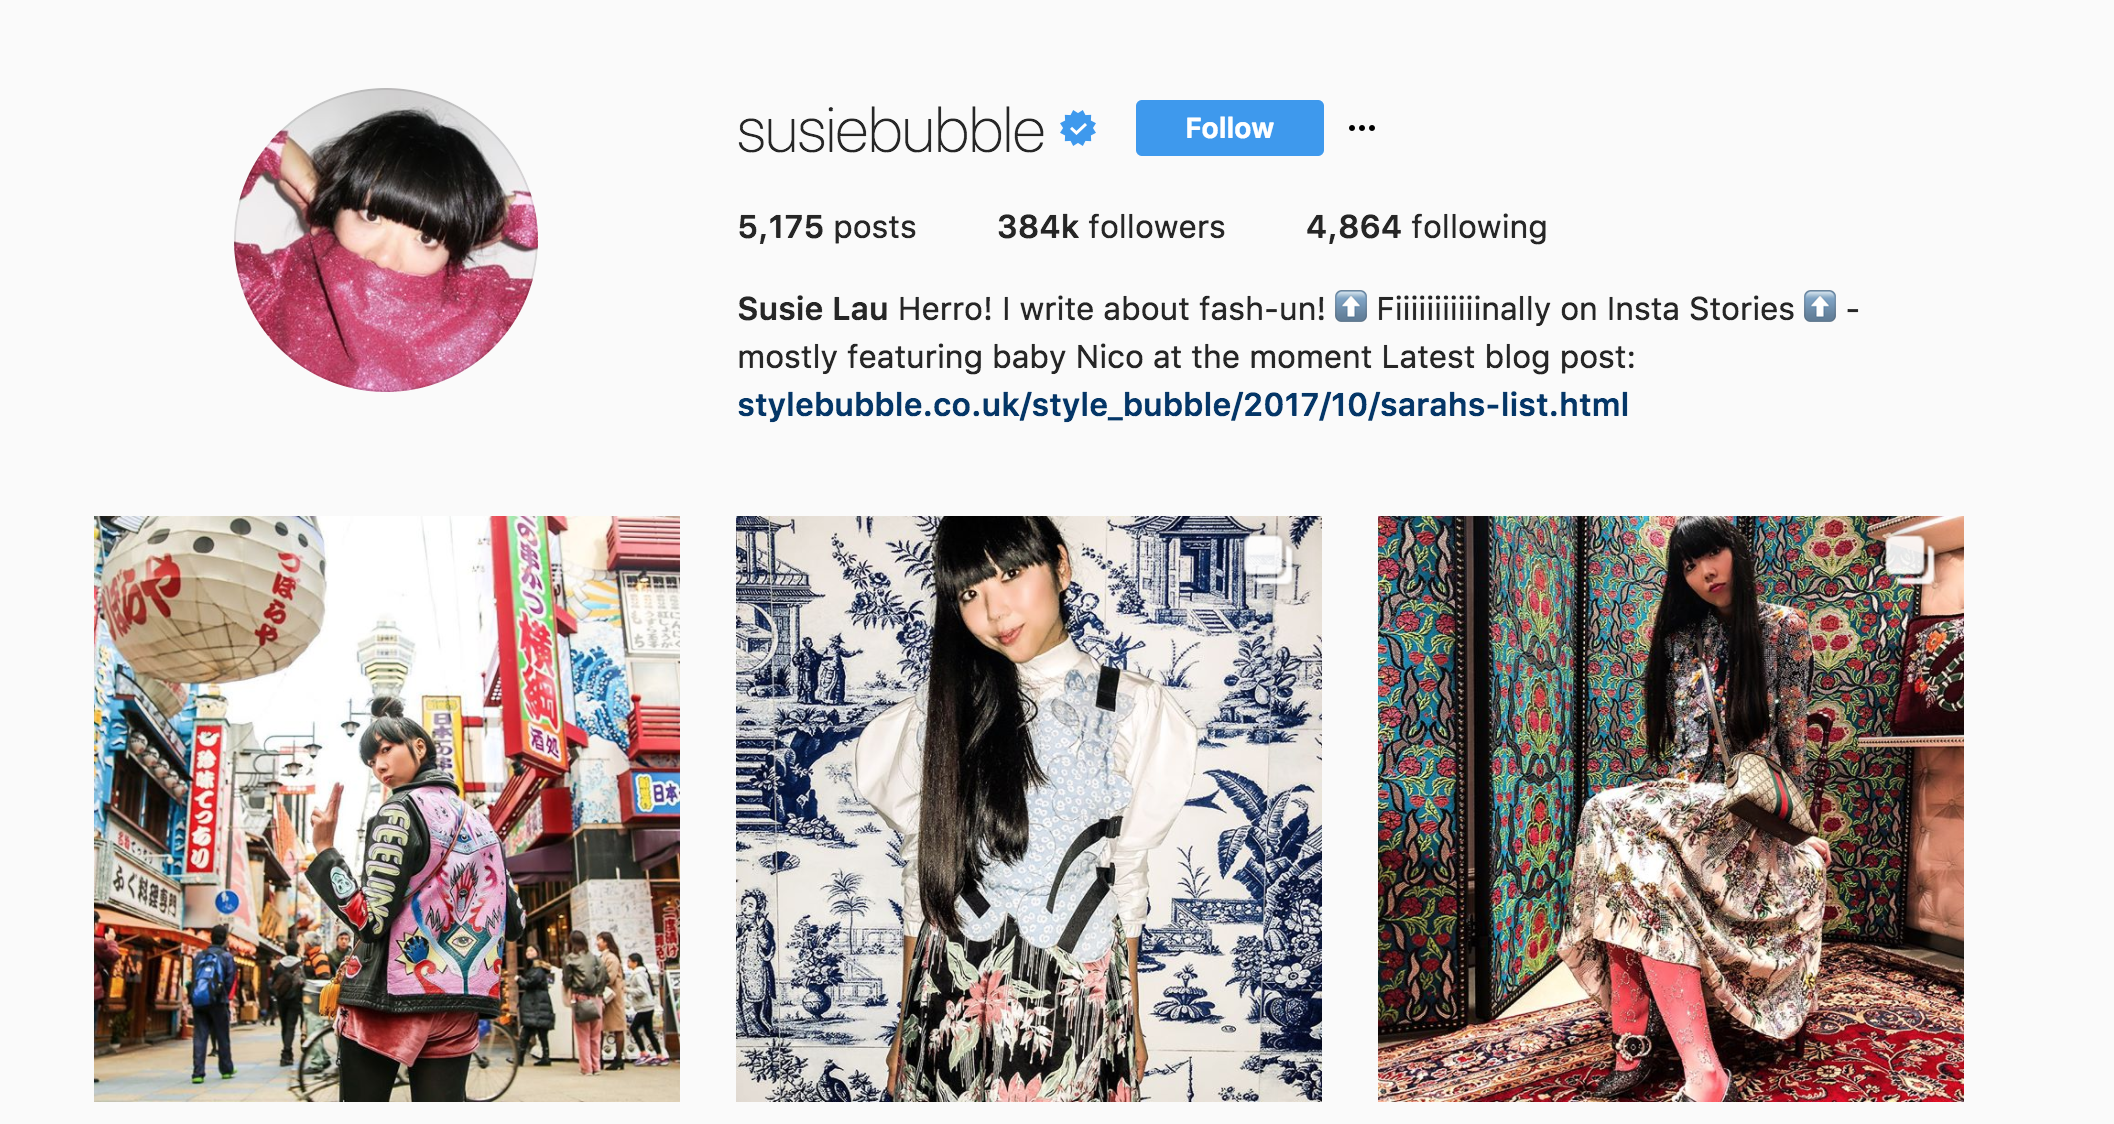 Record-breaking influencer collaboration for In The Style